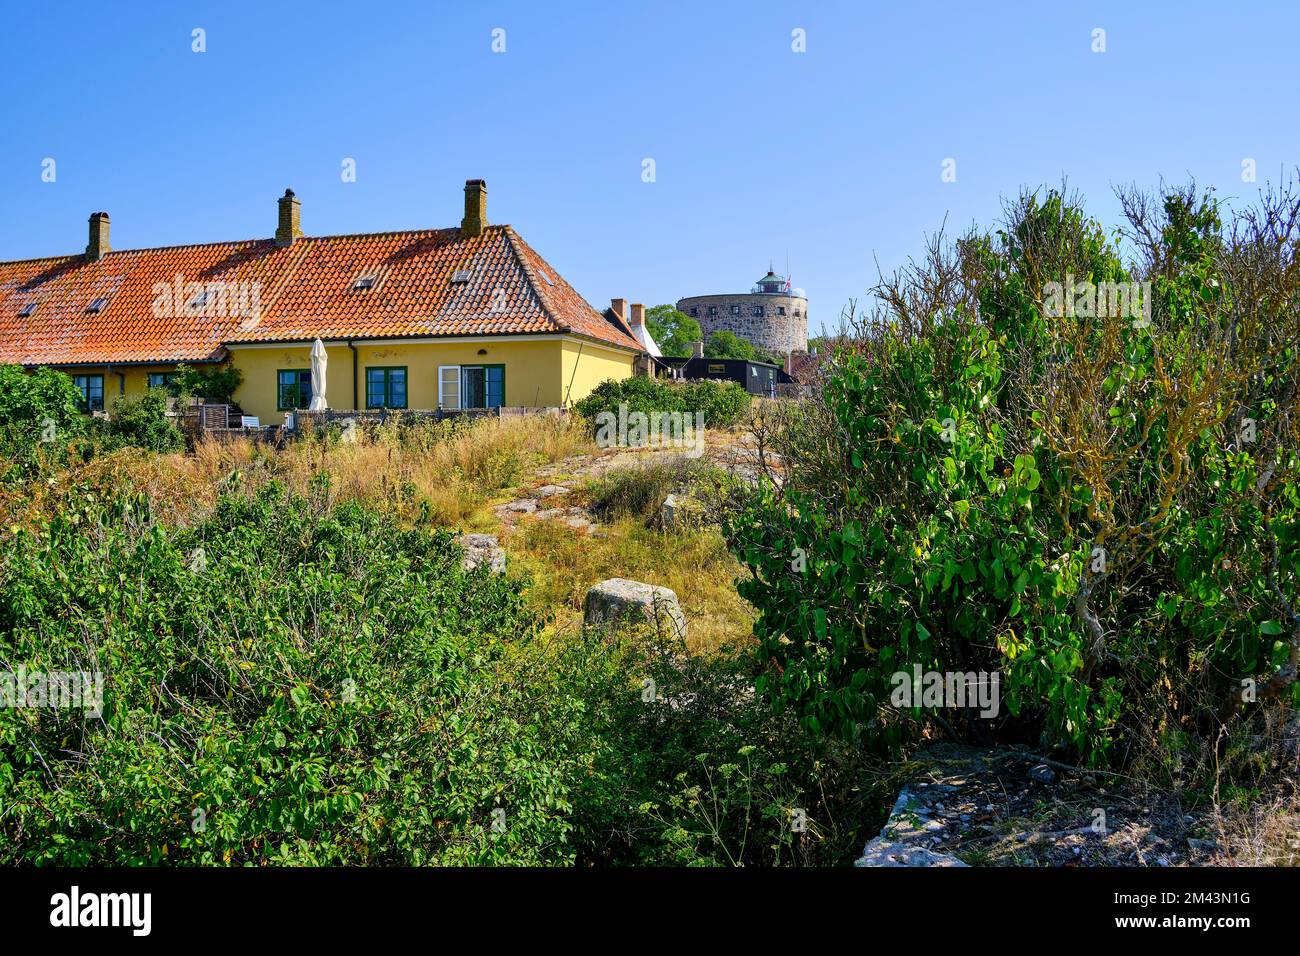 Out and about on the Ertholmen islands, wildly sprawling vegetation and historic structures on Frederiksö, Ertholmene, Denmark, Scandinavia, Europe. Stock Photo